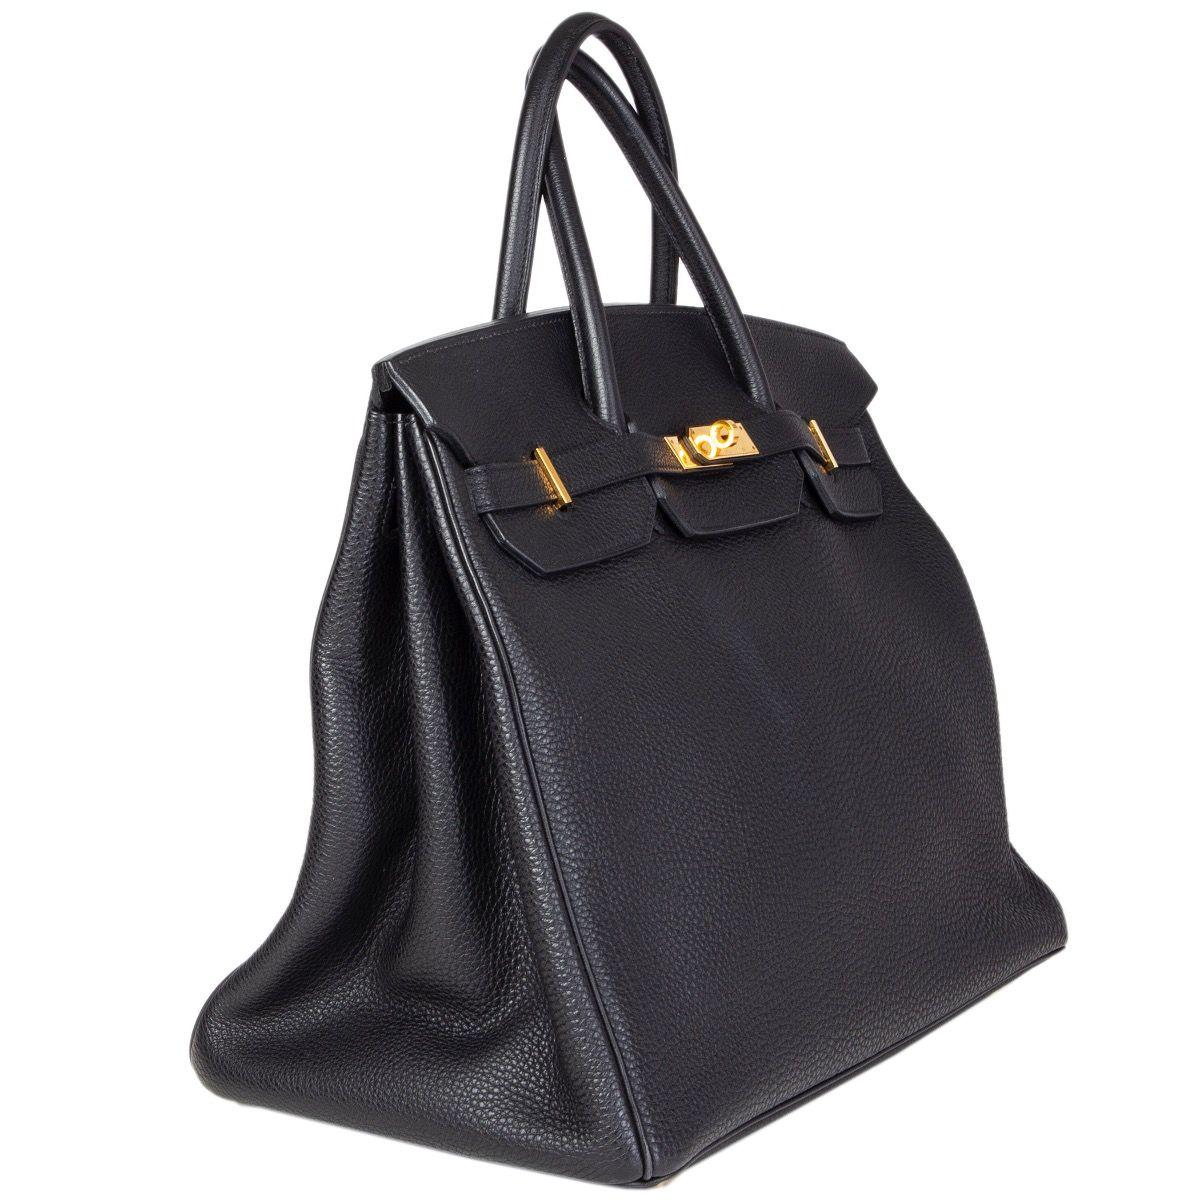 Hermes 'Birkin 40' in black Vache Fjord leather. Lined in Goatskin with an open pocket against the front and a zipper pocket against the back. Has been carried and is in excellent condition. Overall impression of the bag is very good. Comes with